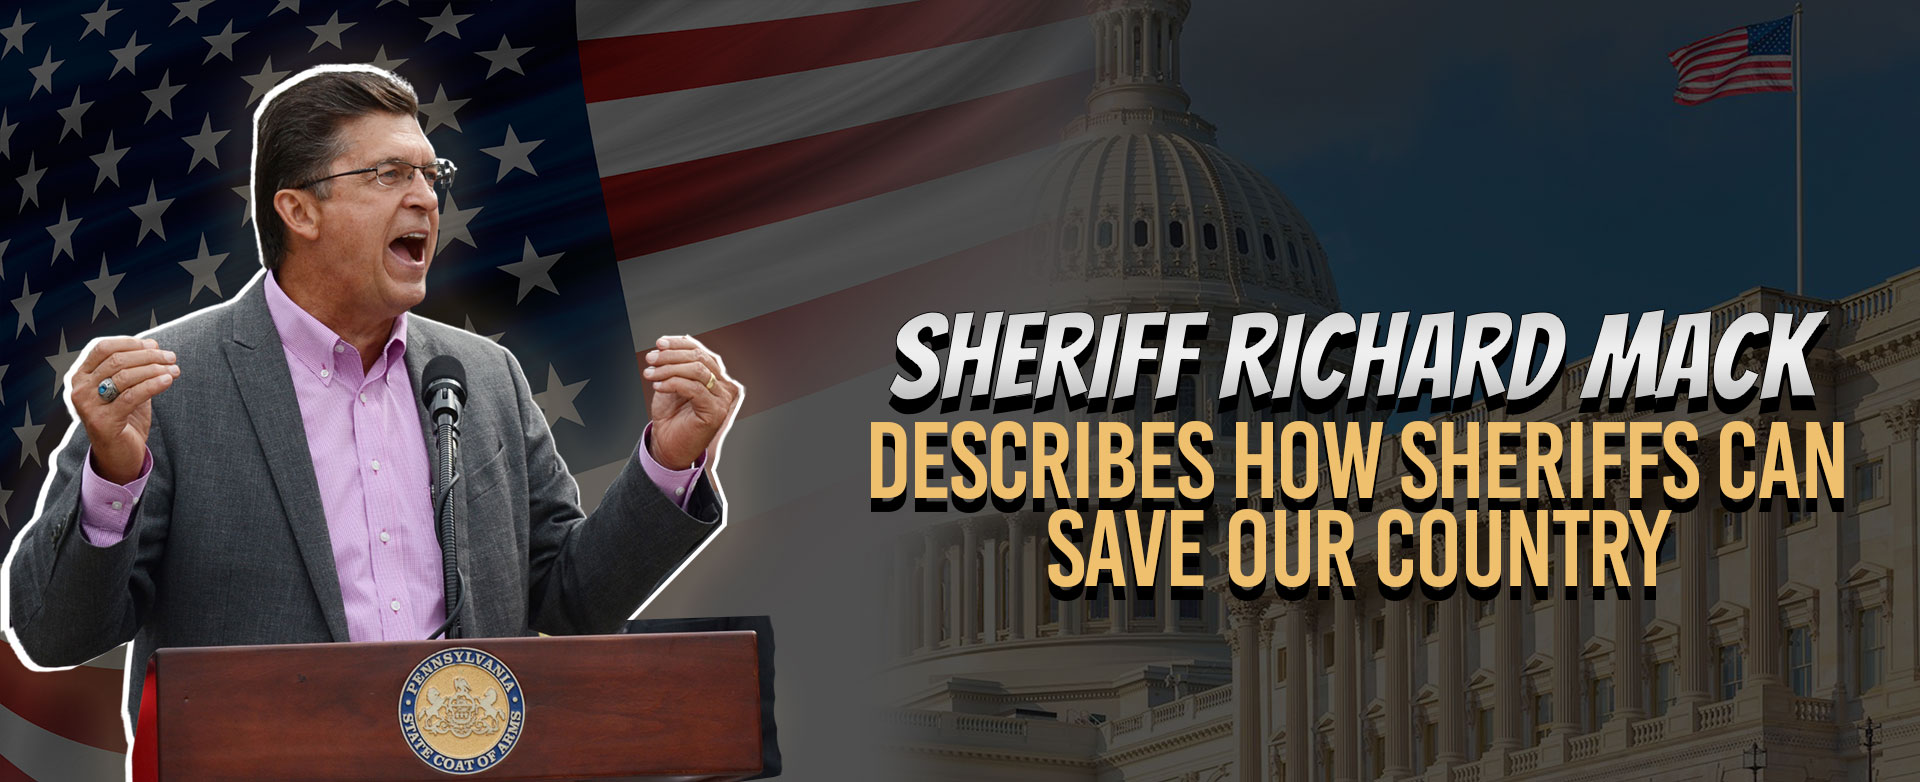 MyPatriotsNetwork-Sheriff Richard Mack Describes How Sheriffs Can Save Our Country